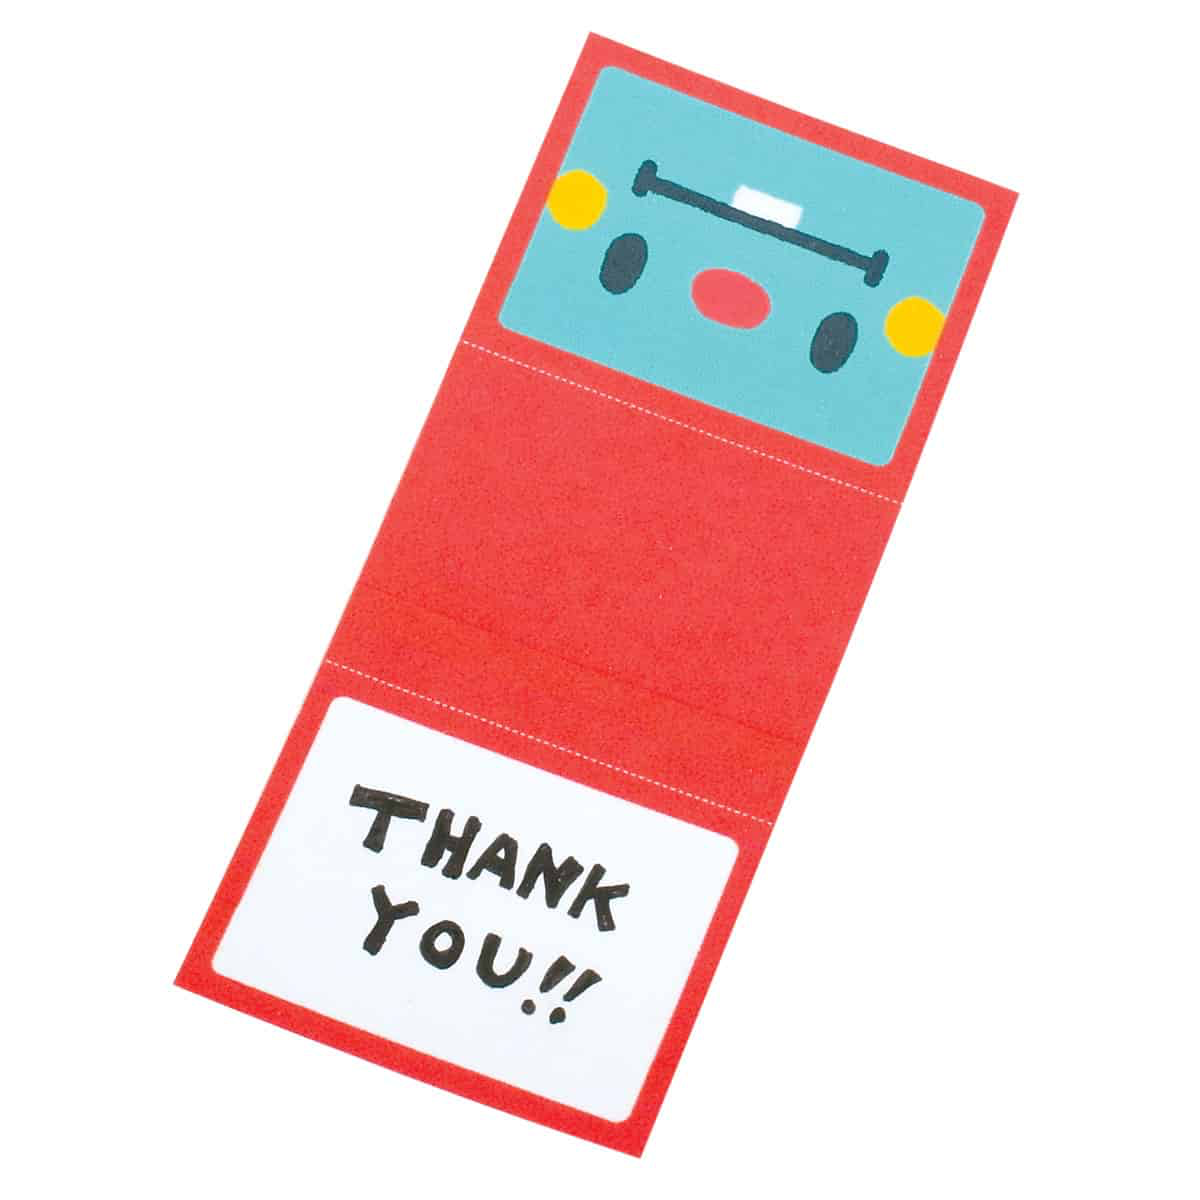 Thank You message piece from Wooden Greeting Card.